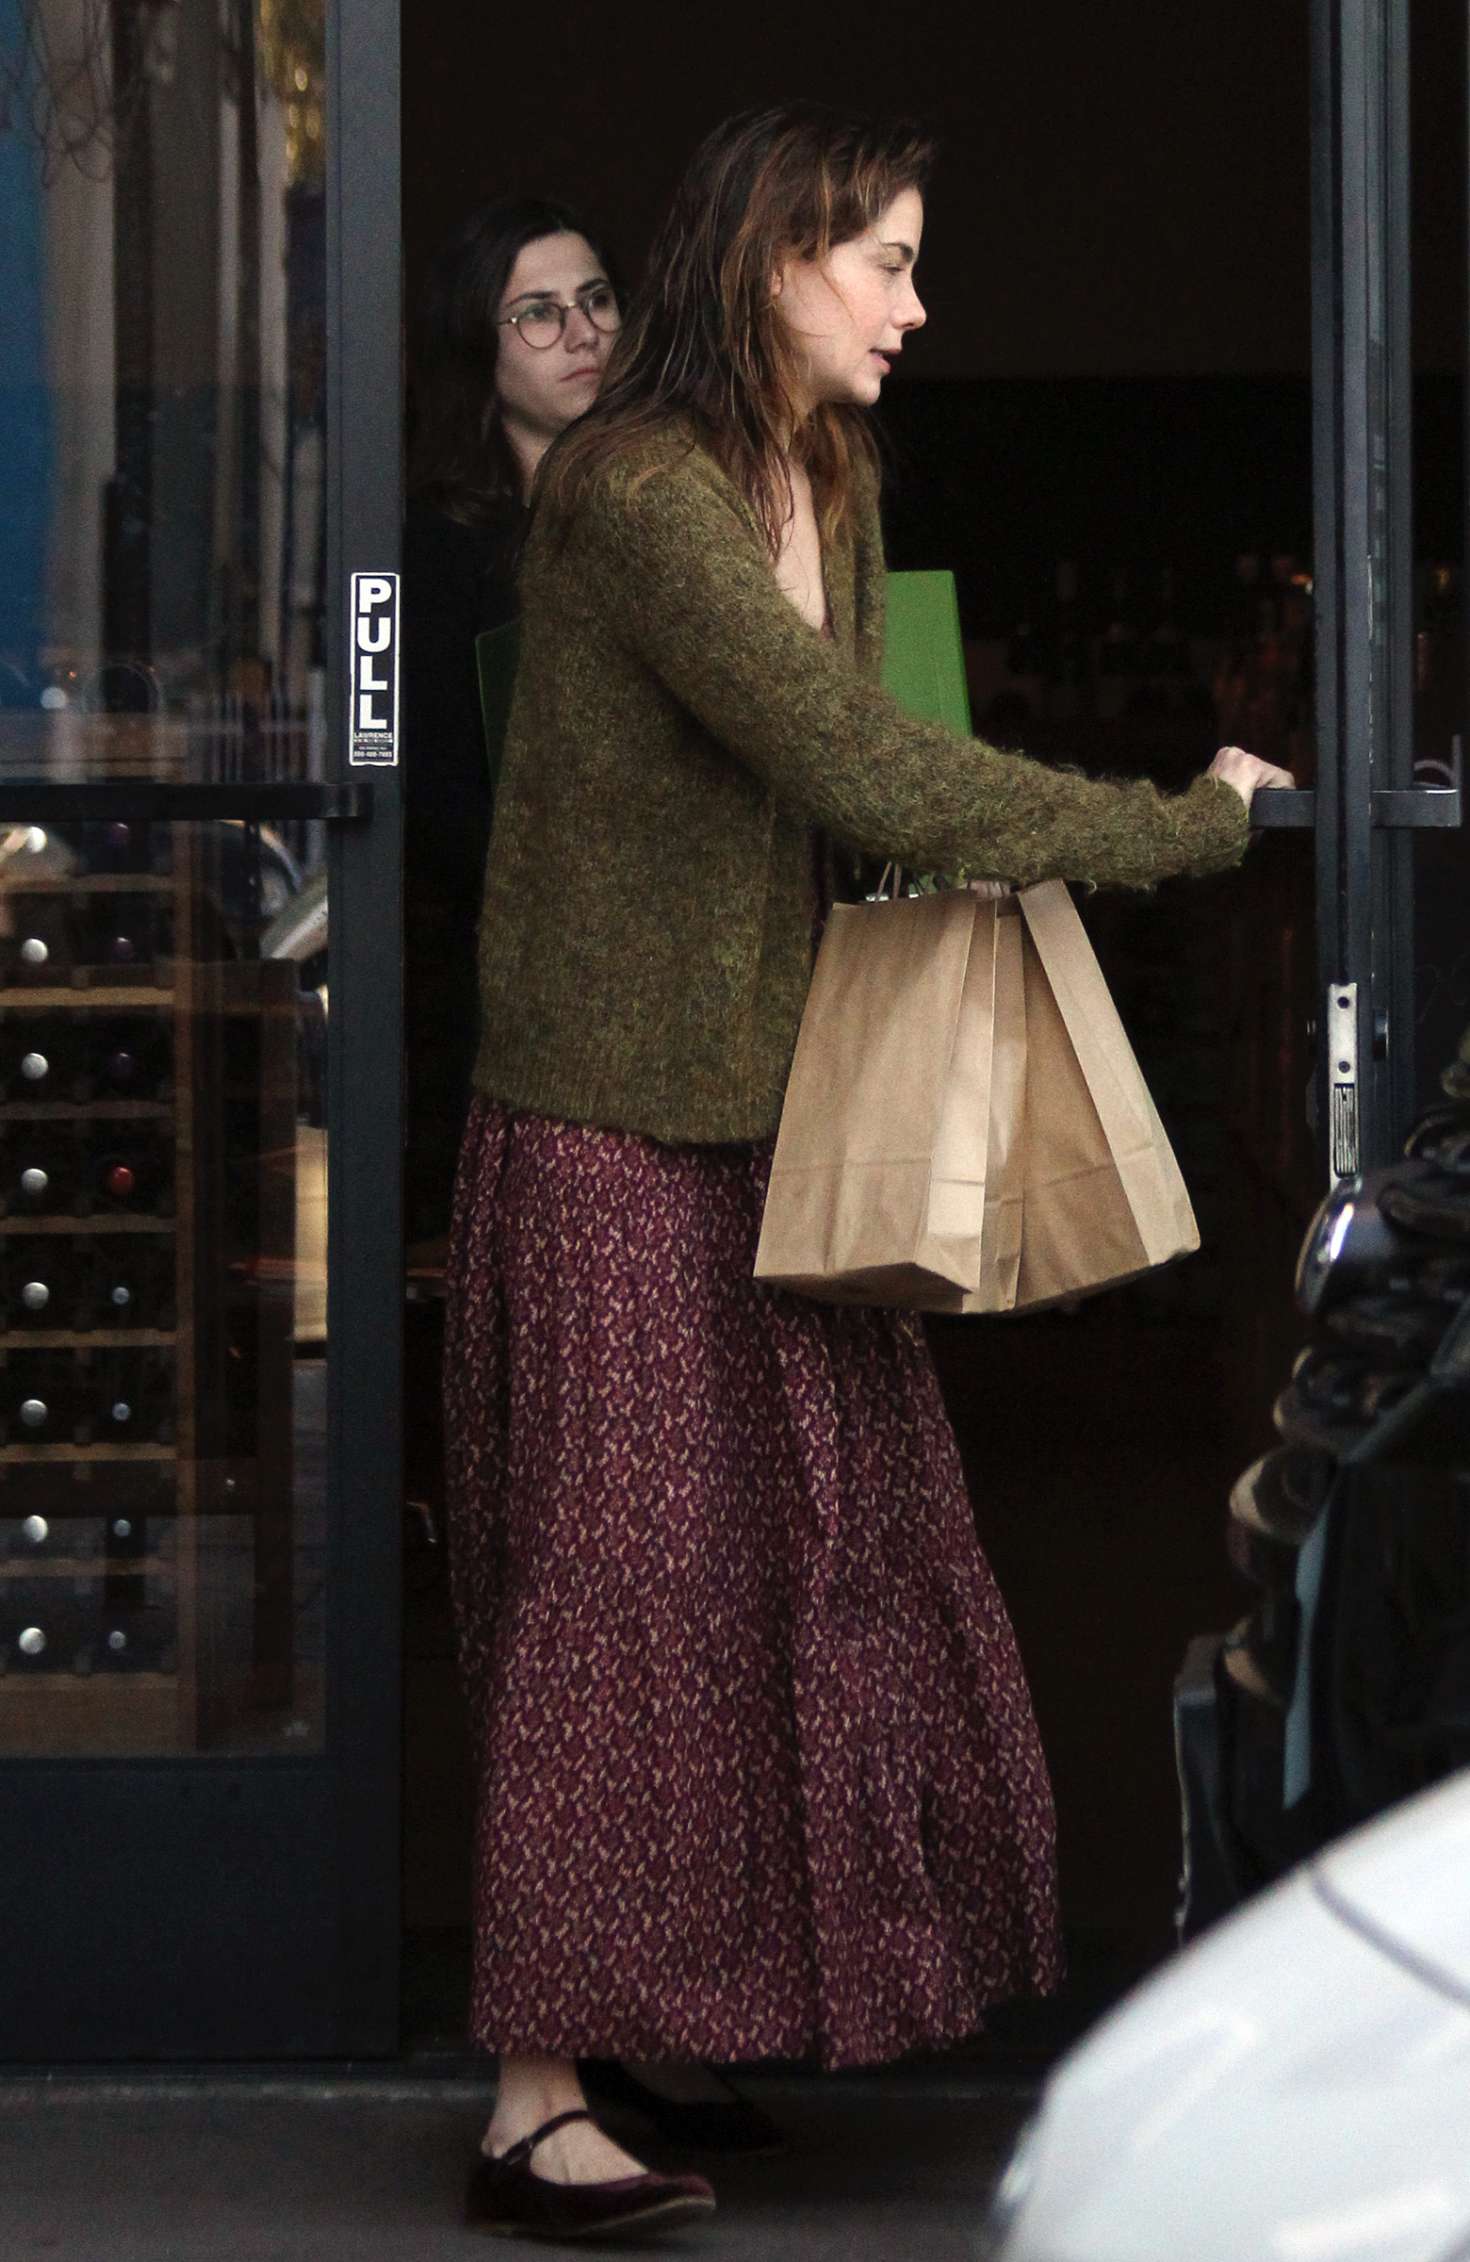 Michelle Monaghan - Out in Los Angeles